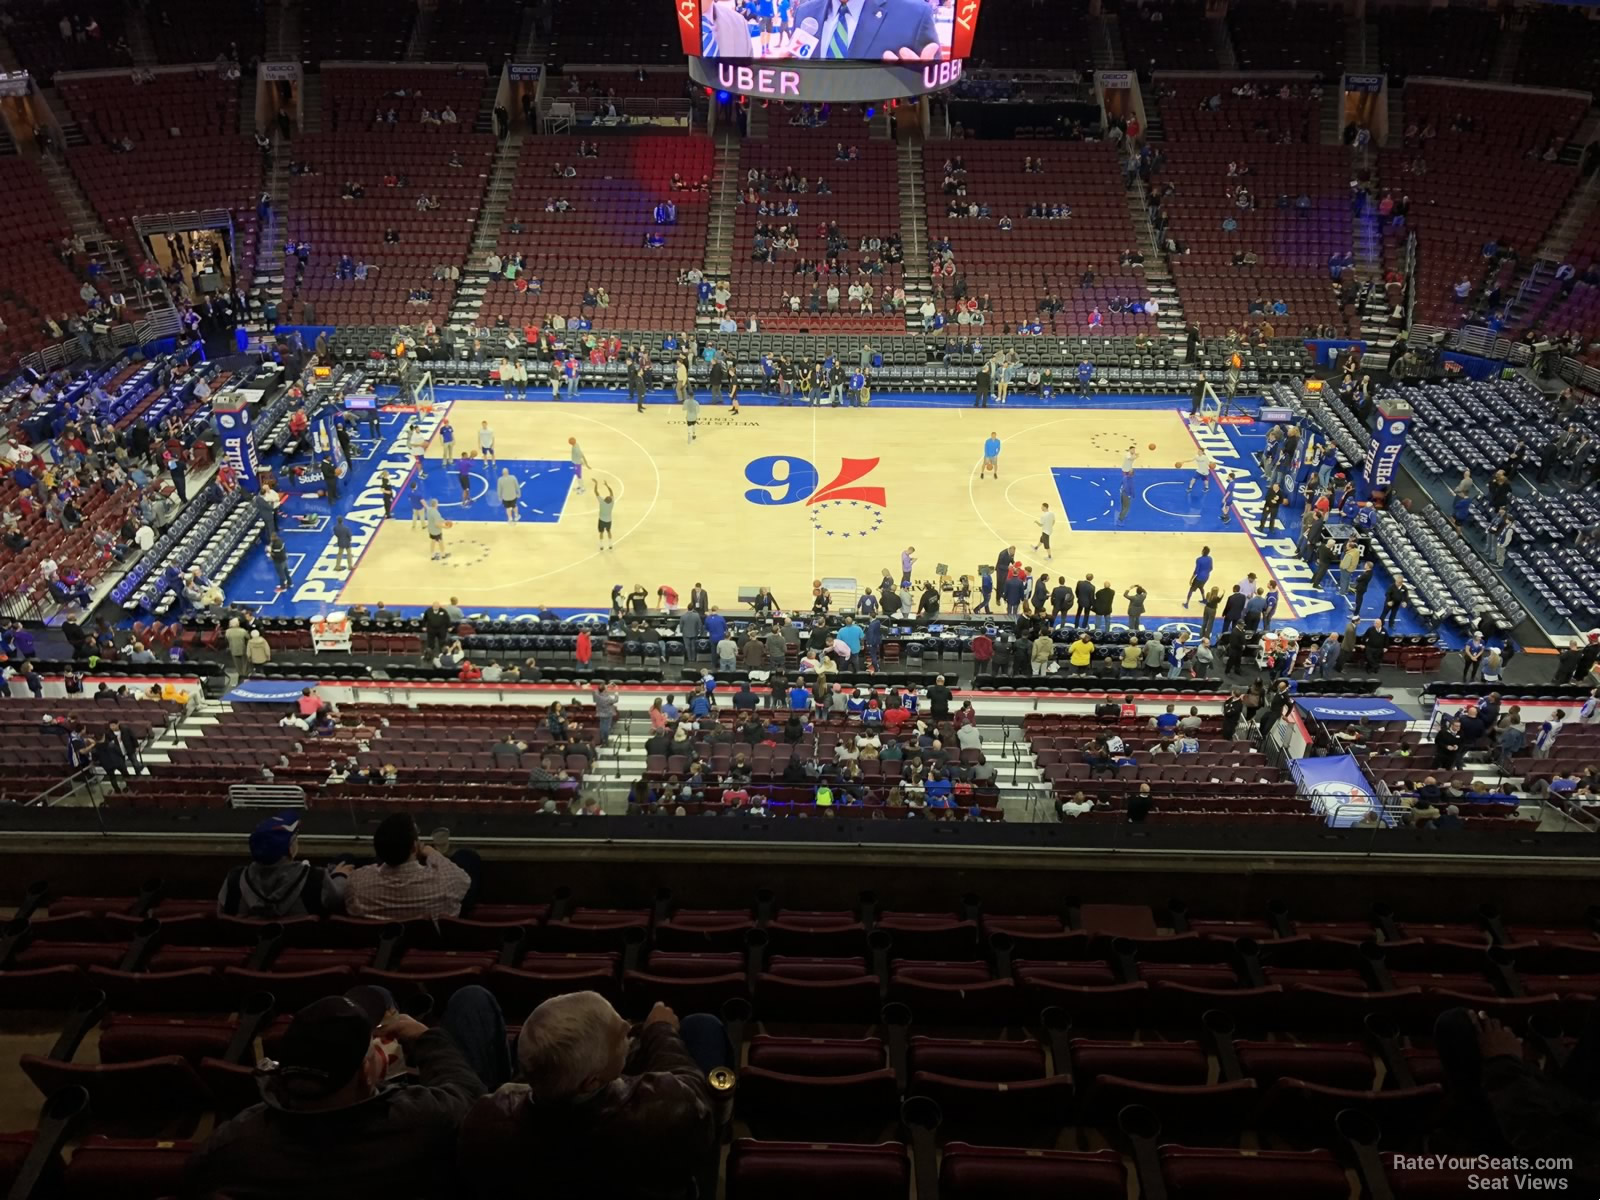 section 201, row 7 seat view  for basketball - wells fargo center